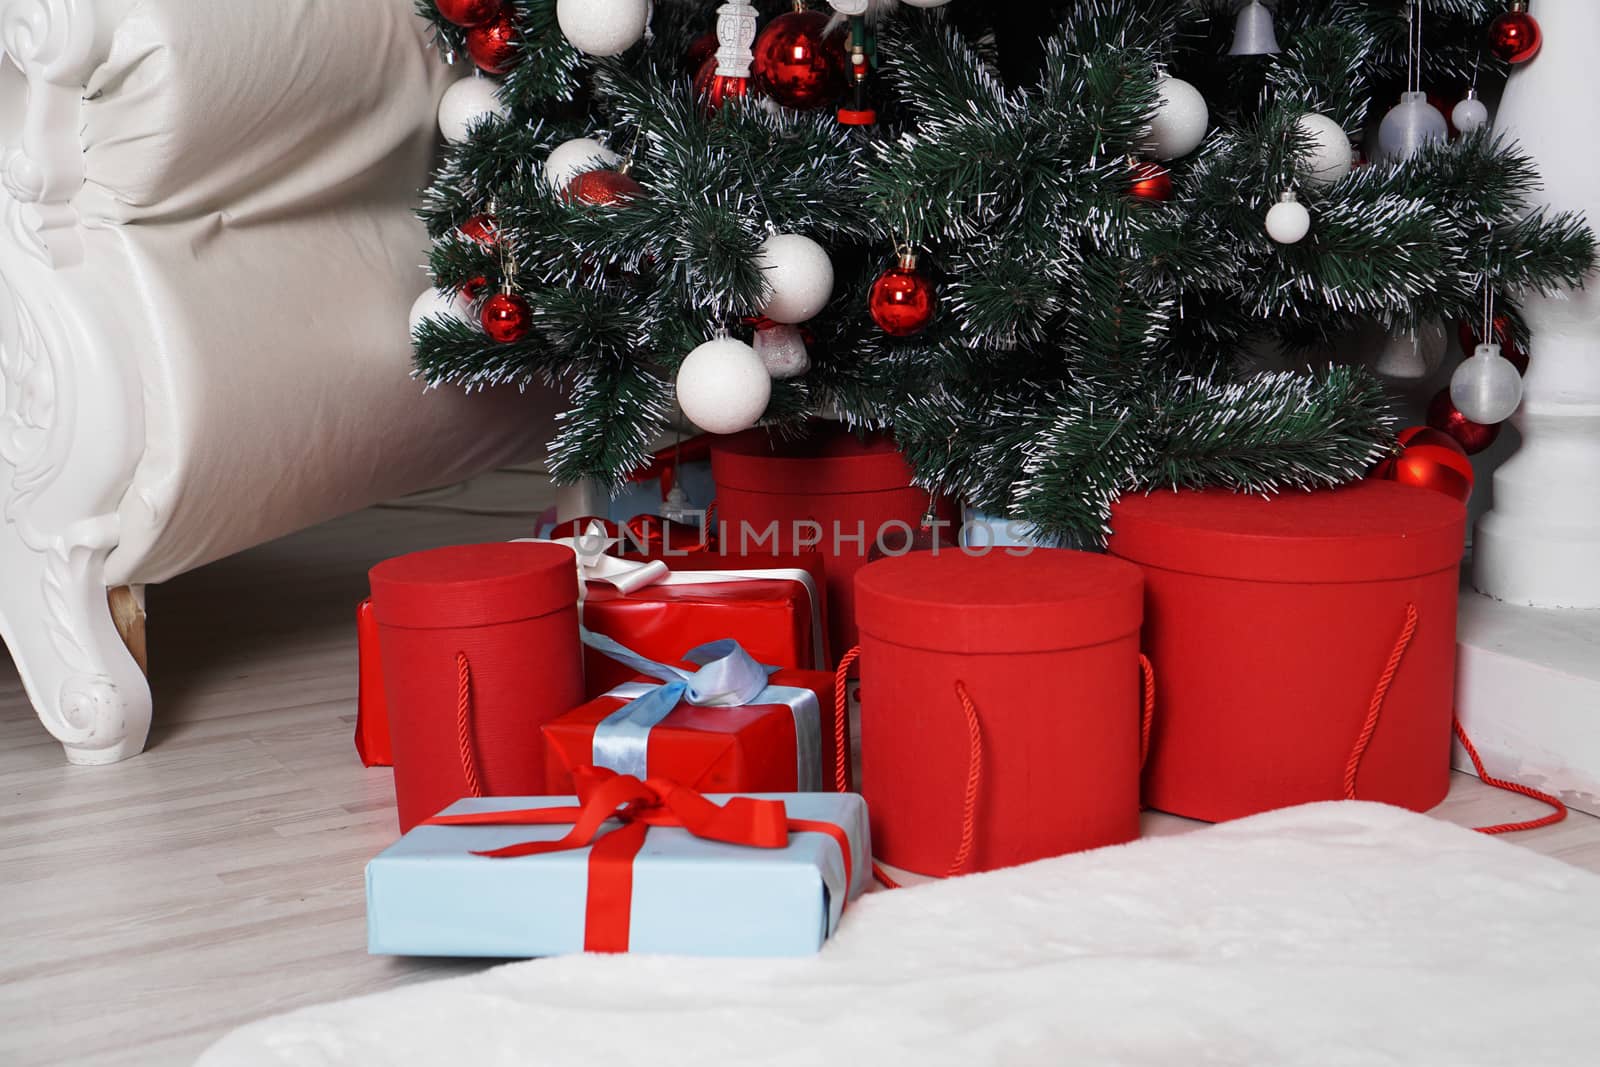 Lots of beautifull wrapped Christmas presents in round boxes in red and blue under the Christmas tree. Concept of Christmas and New Year holidays.